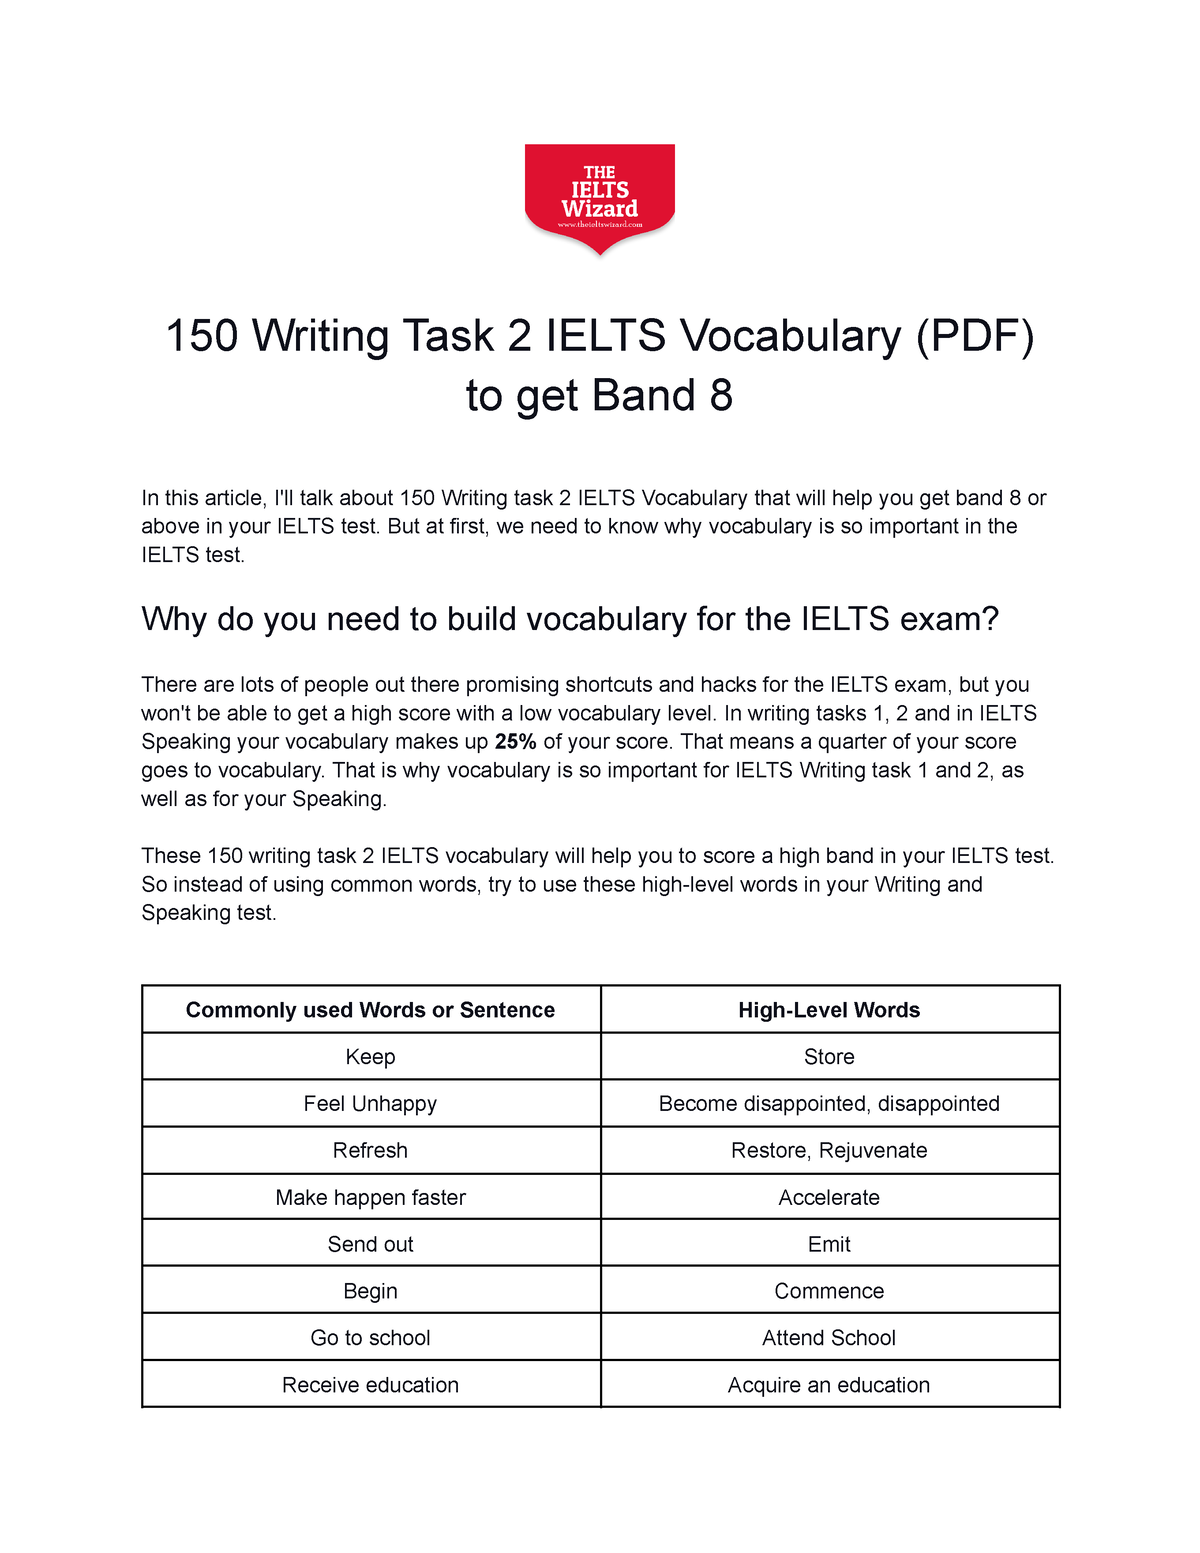 150 Writing Task 2 Ielts Vocabulary (Pdf) To Get Band 8 - 150 Writing Task 2  Ielts Vocabulary (Pdf) - Studocu